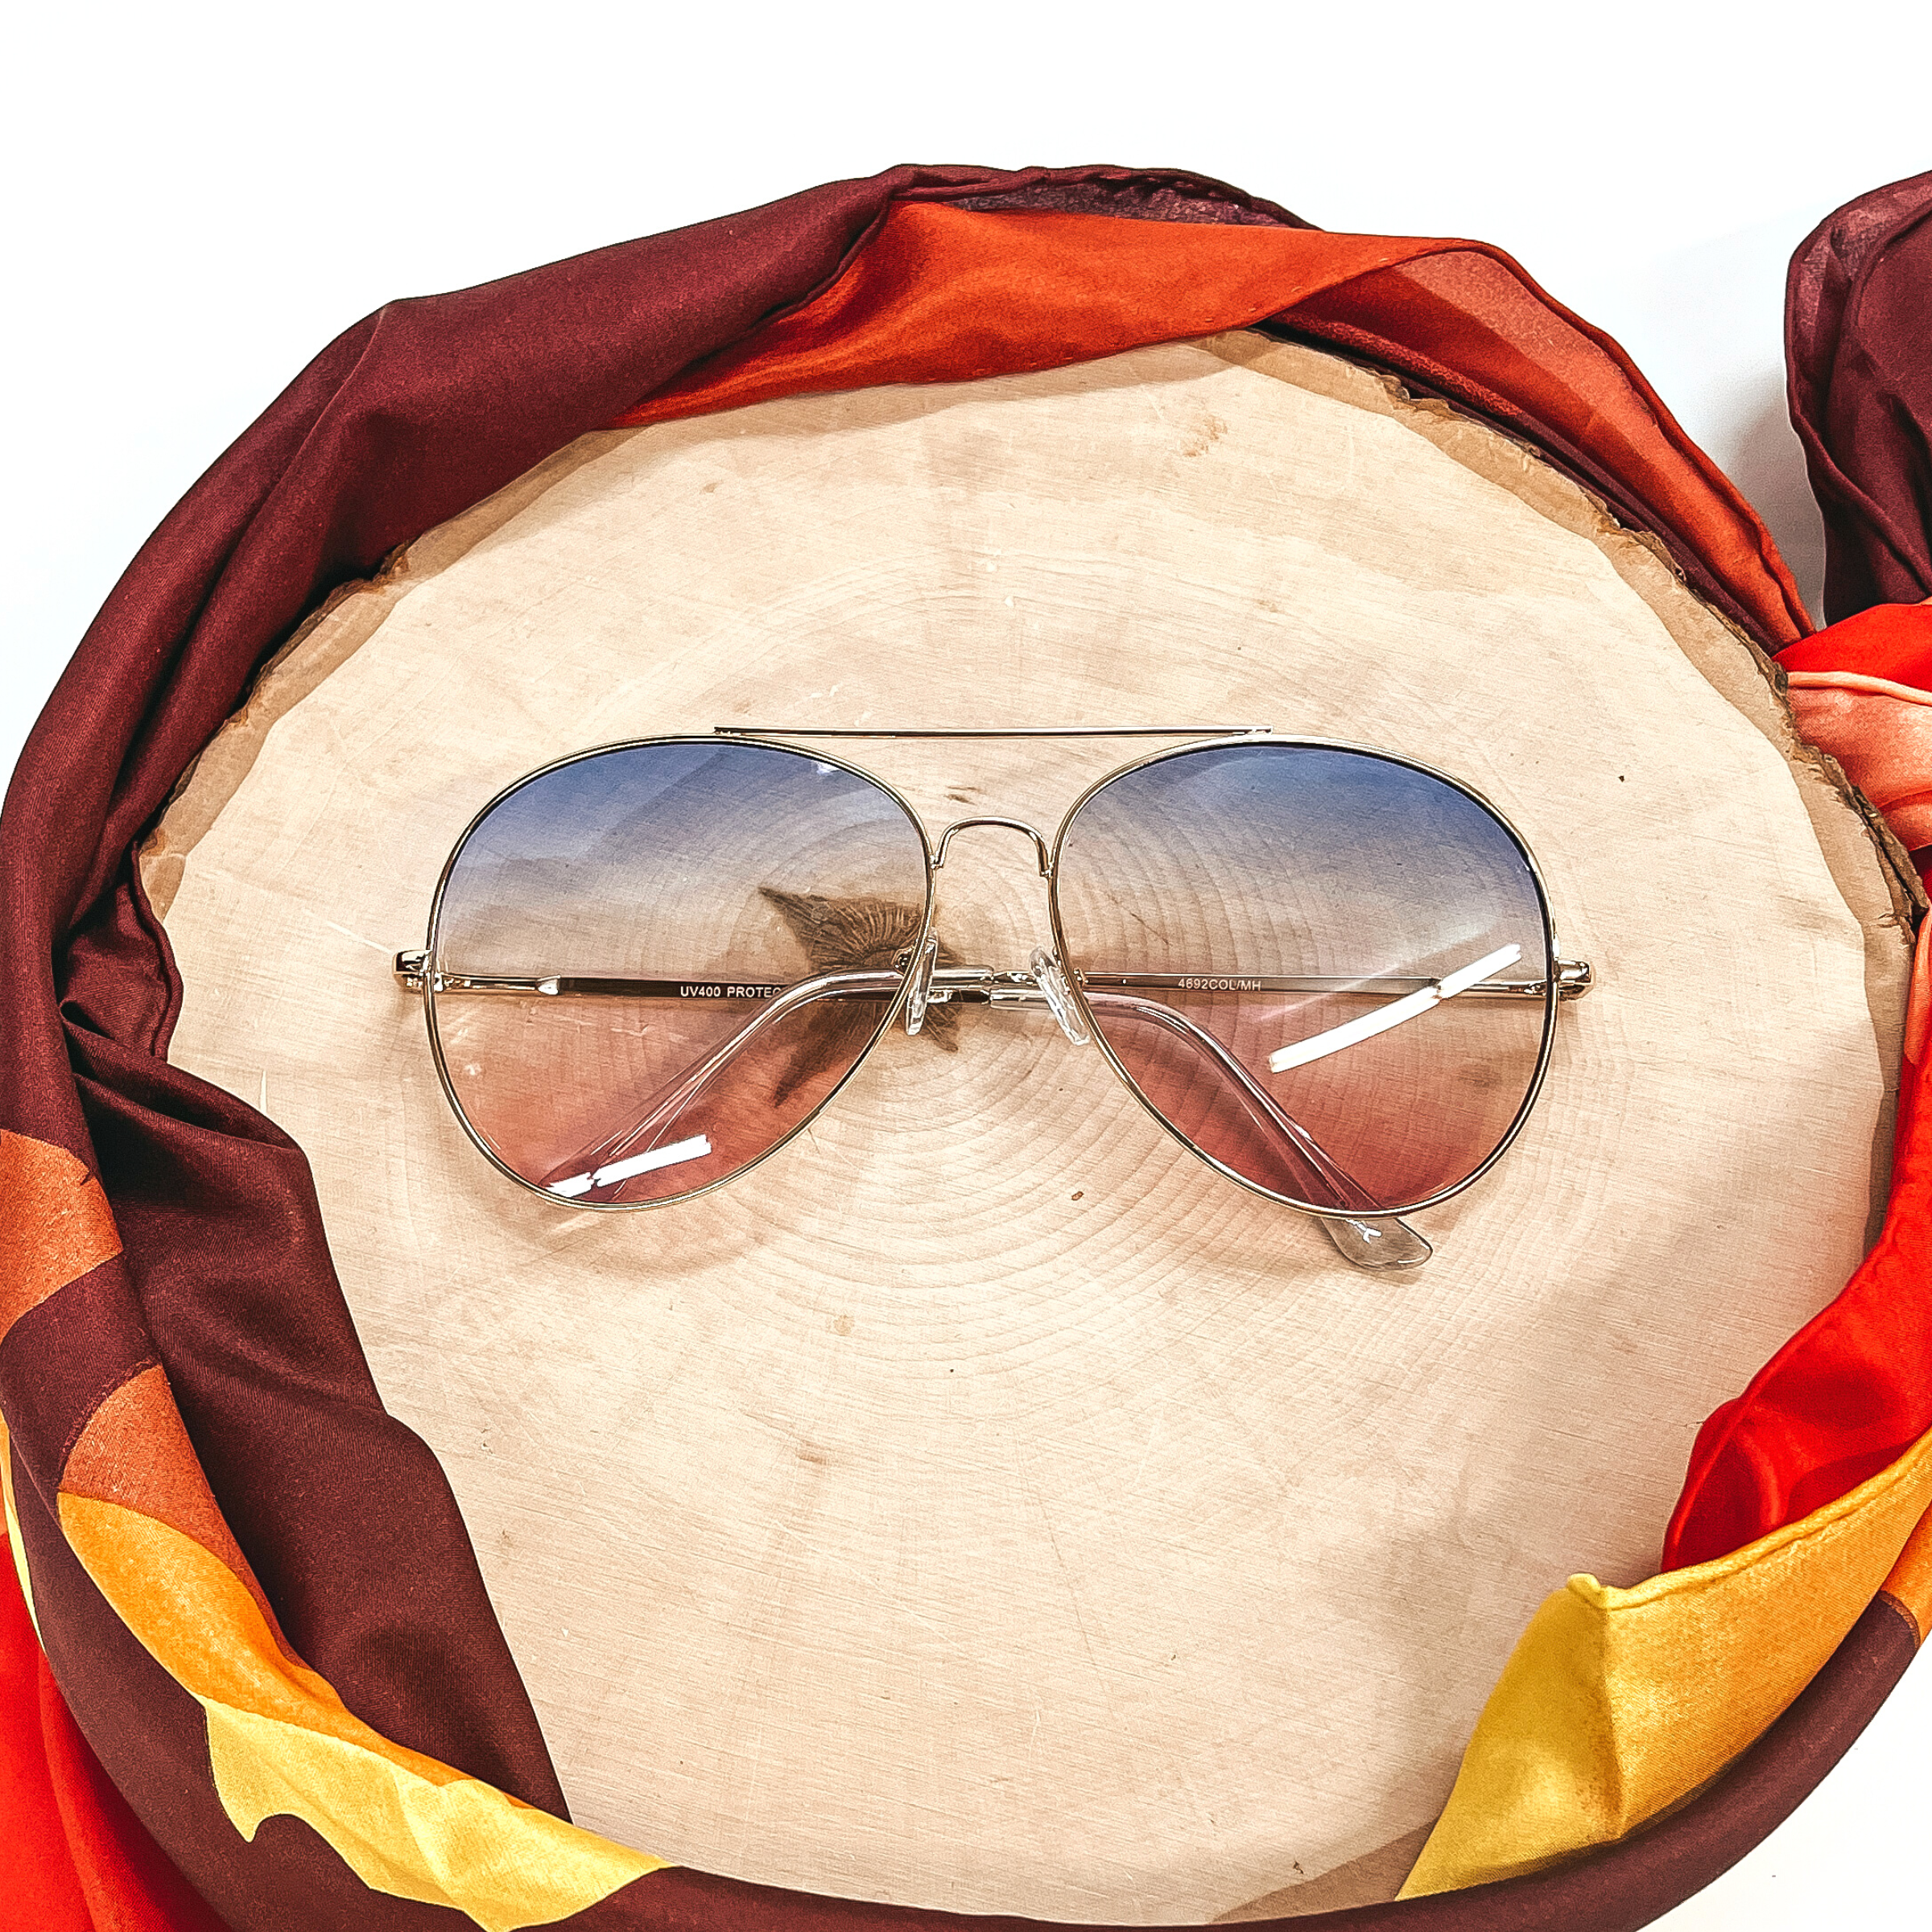 These are aviator style sunglasses with blue and light pink gradient  lenses and a gold tone outline/frame.  These sunglasses are taken on top of a wooden slate and a white background.  There is a brown,orange, and yellow wild rag around the wooden slate as decor.